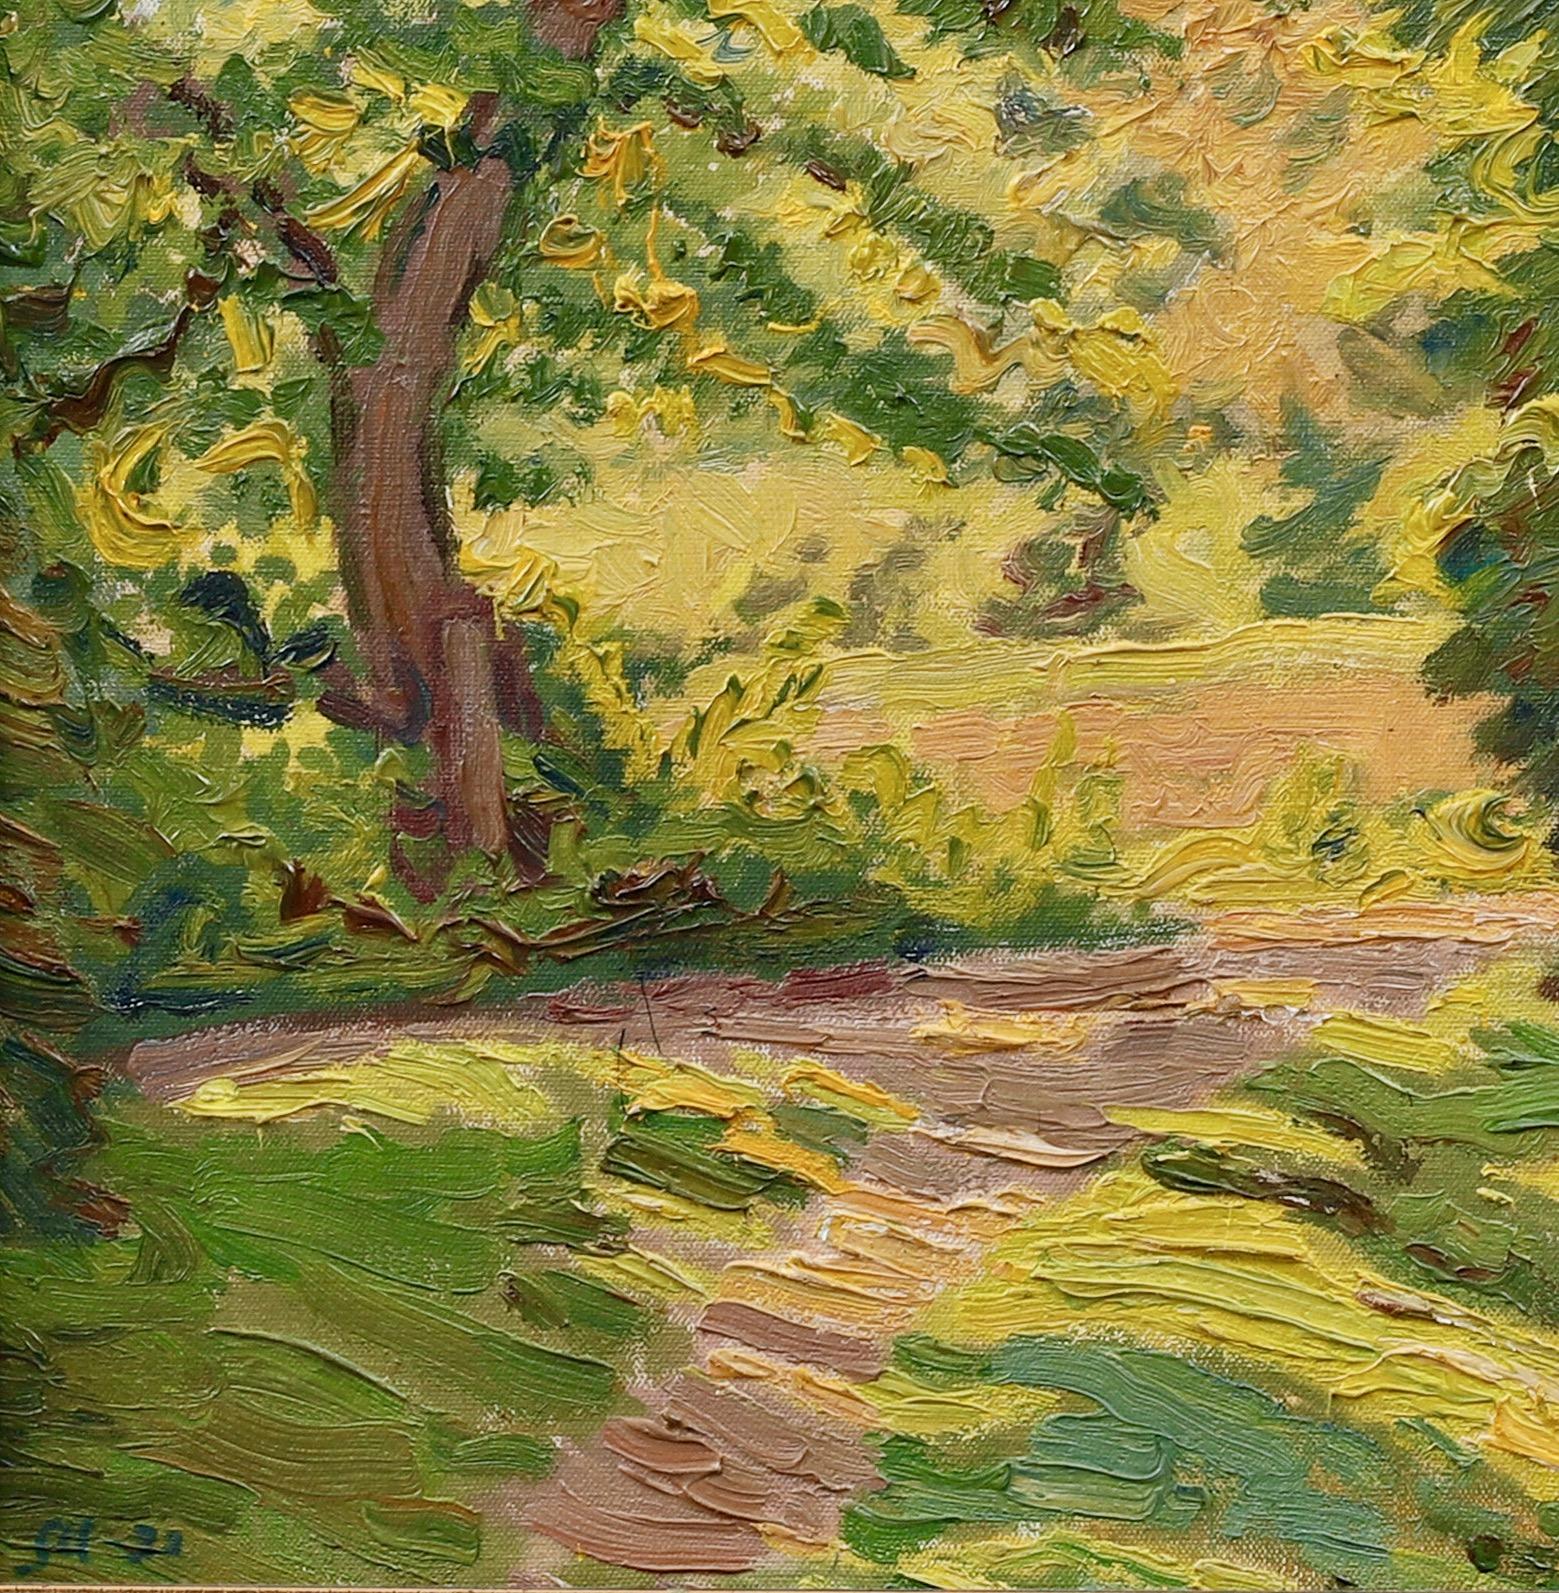 A painting of a forest clearing in intense green and yellow colors by Sigfrid Ullman (1886 - 1960). Oil on canvas laid on board. Signed with monogram SU and dated 1933.  Frame later. 
Sigfrid Ullman was a Swedish artist who started his artistic